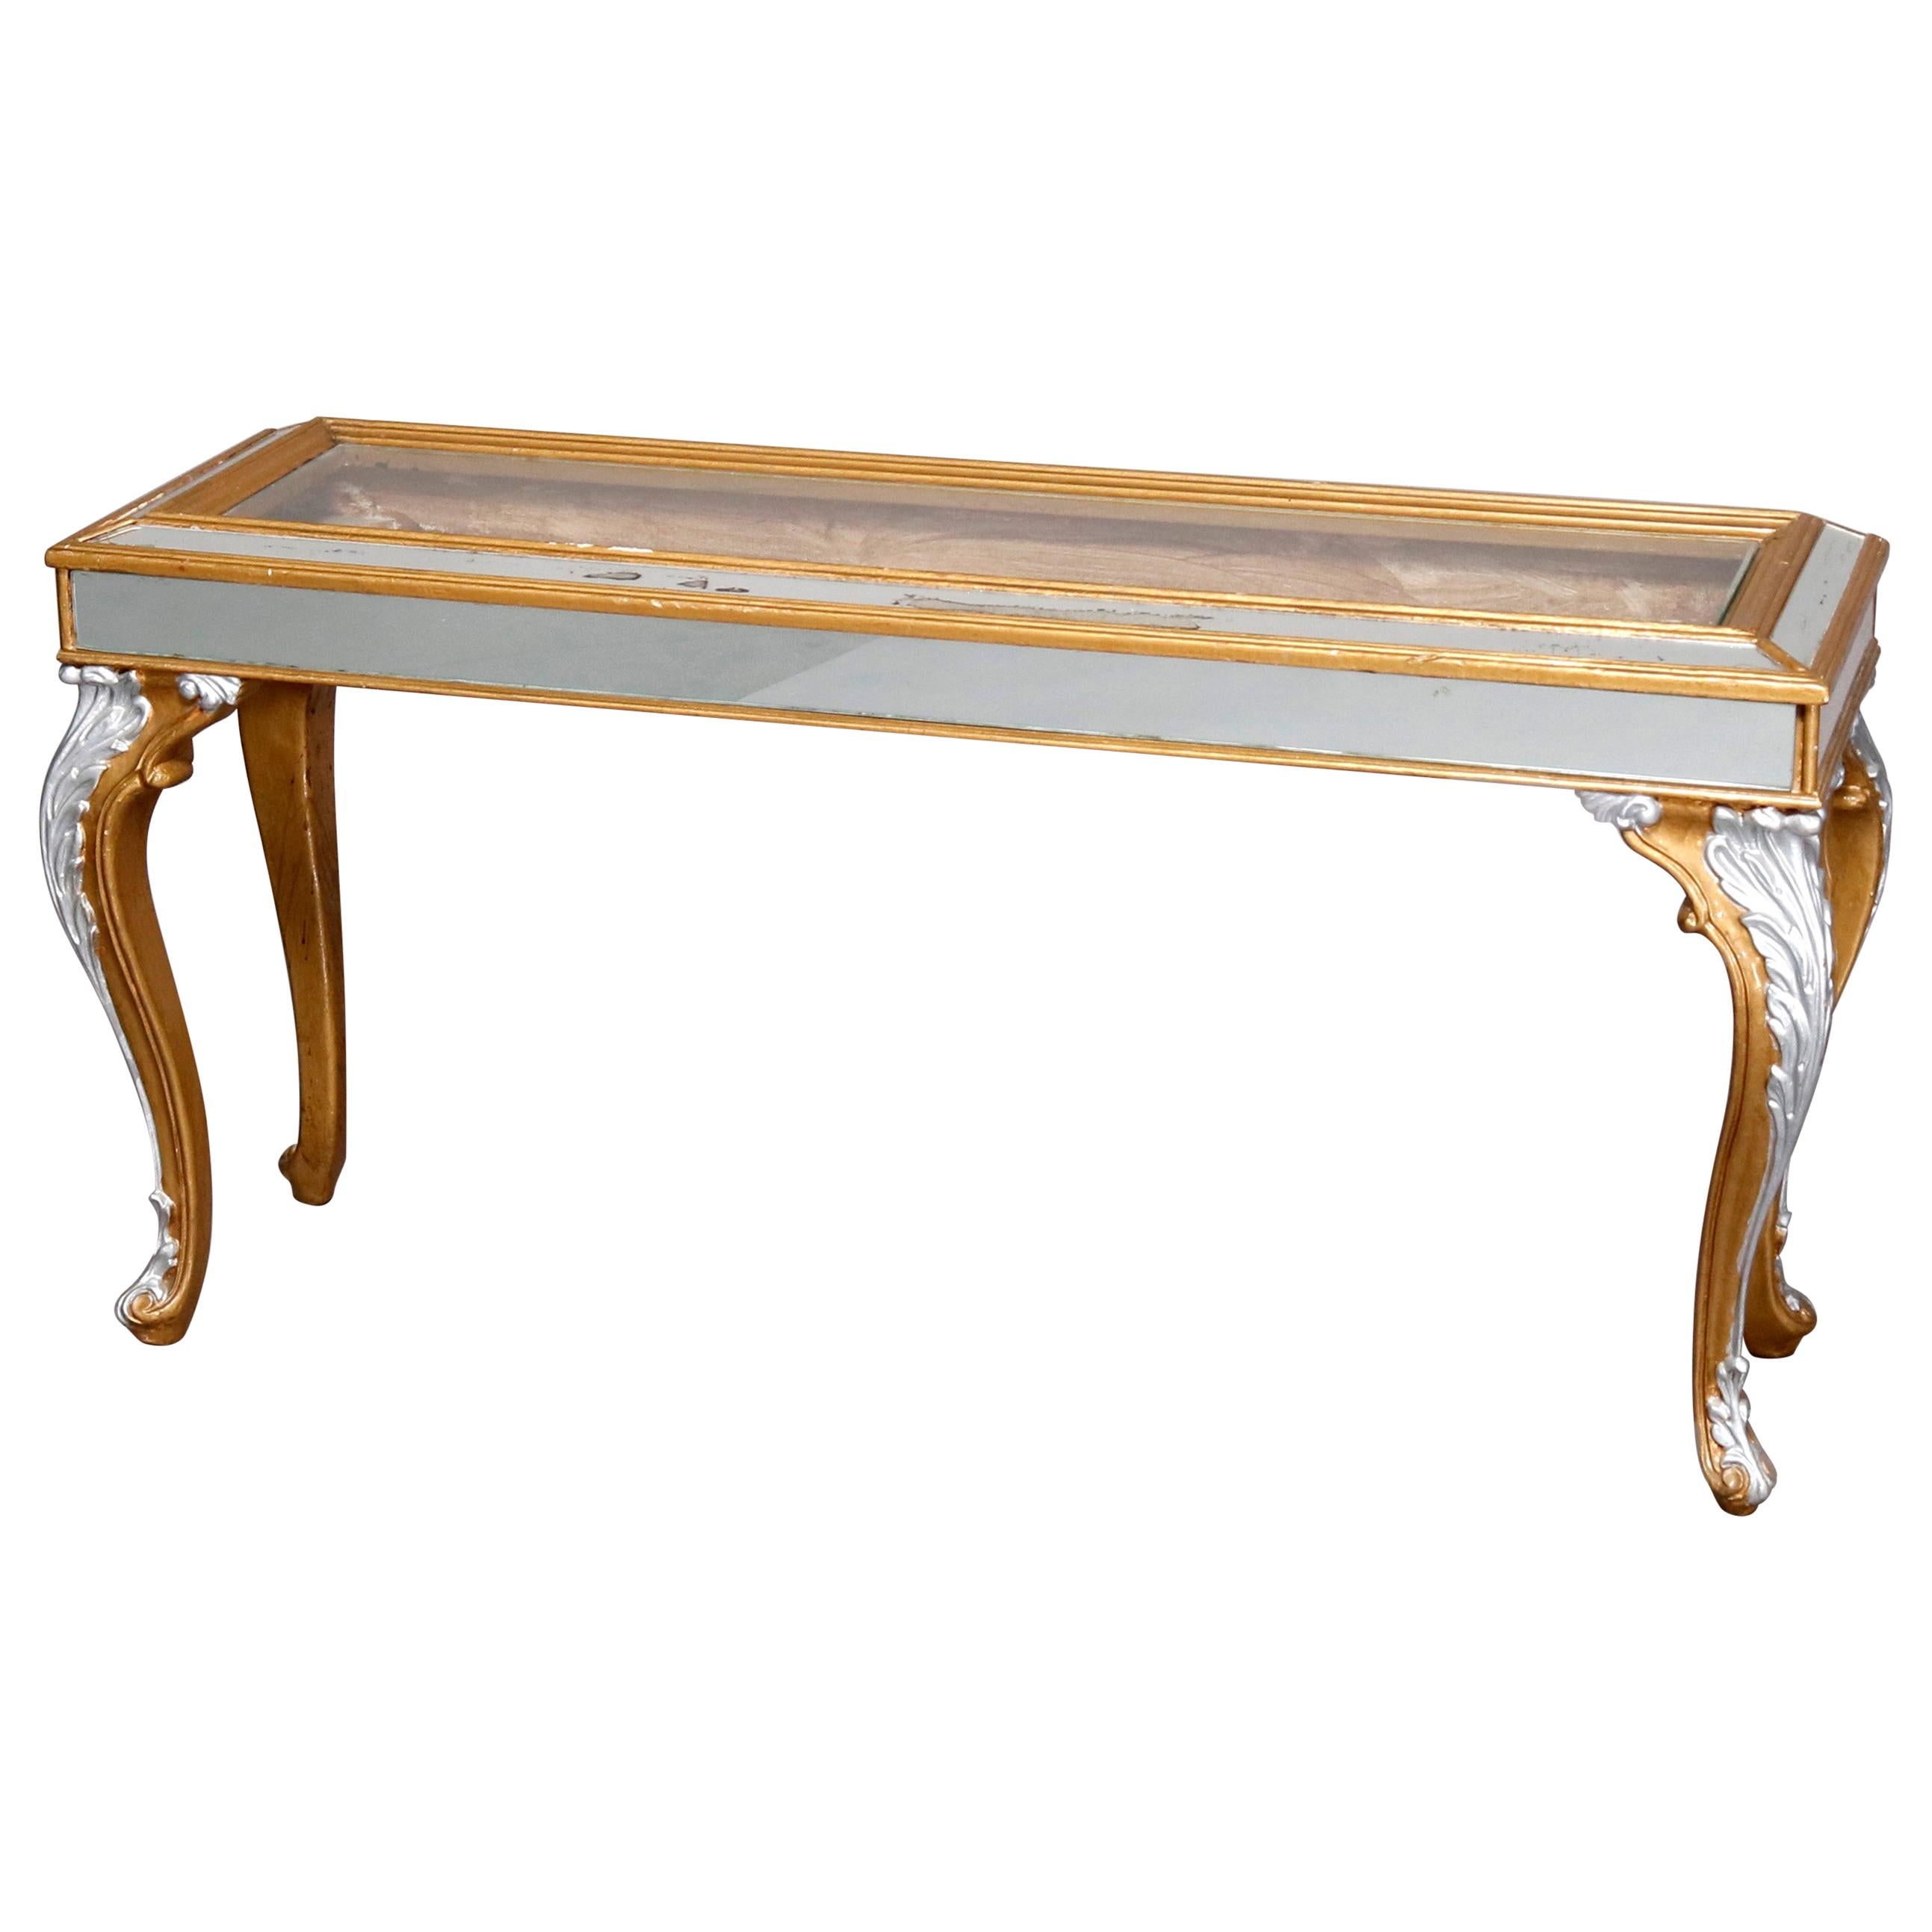 French Louis XIV Style Carved Giltwood & Mirrored Glass Top Sofa Table